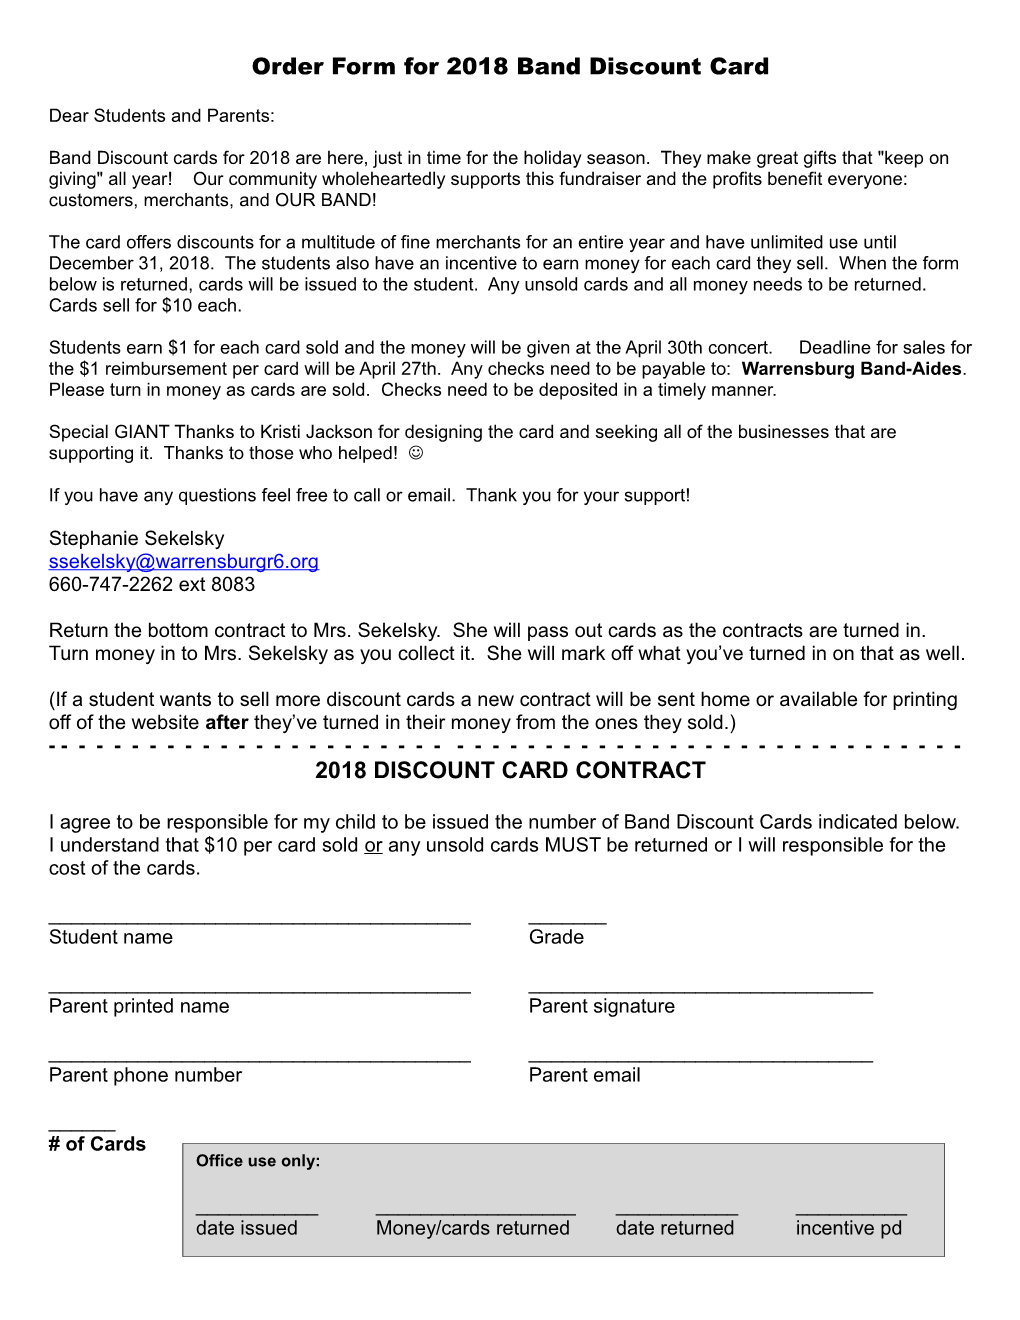 Order Form for 2010 Band Discount Card